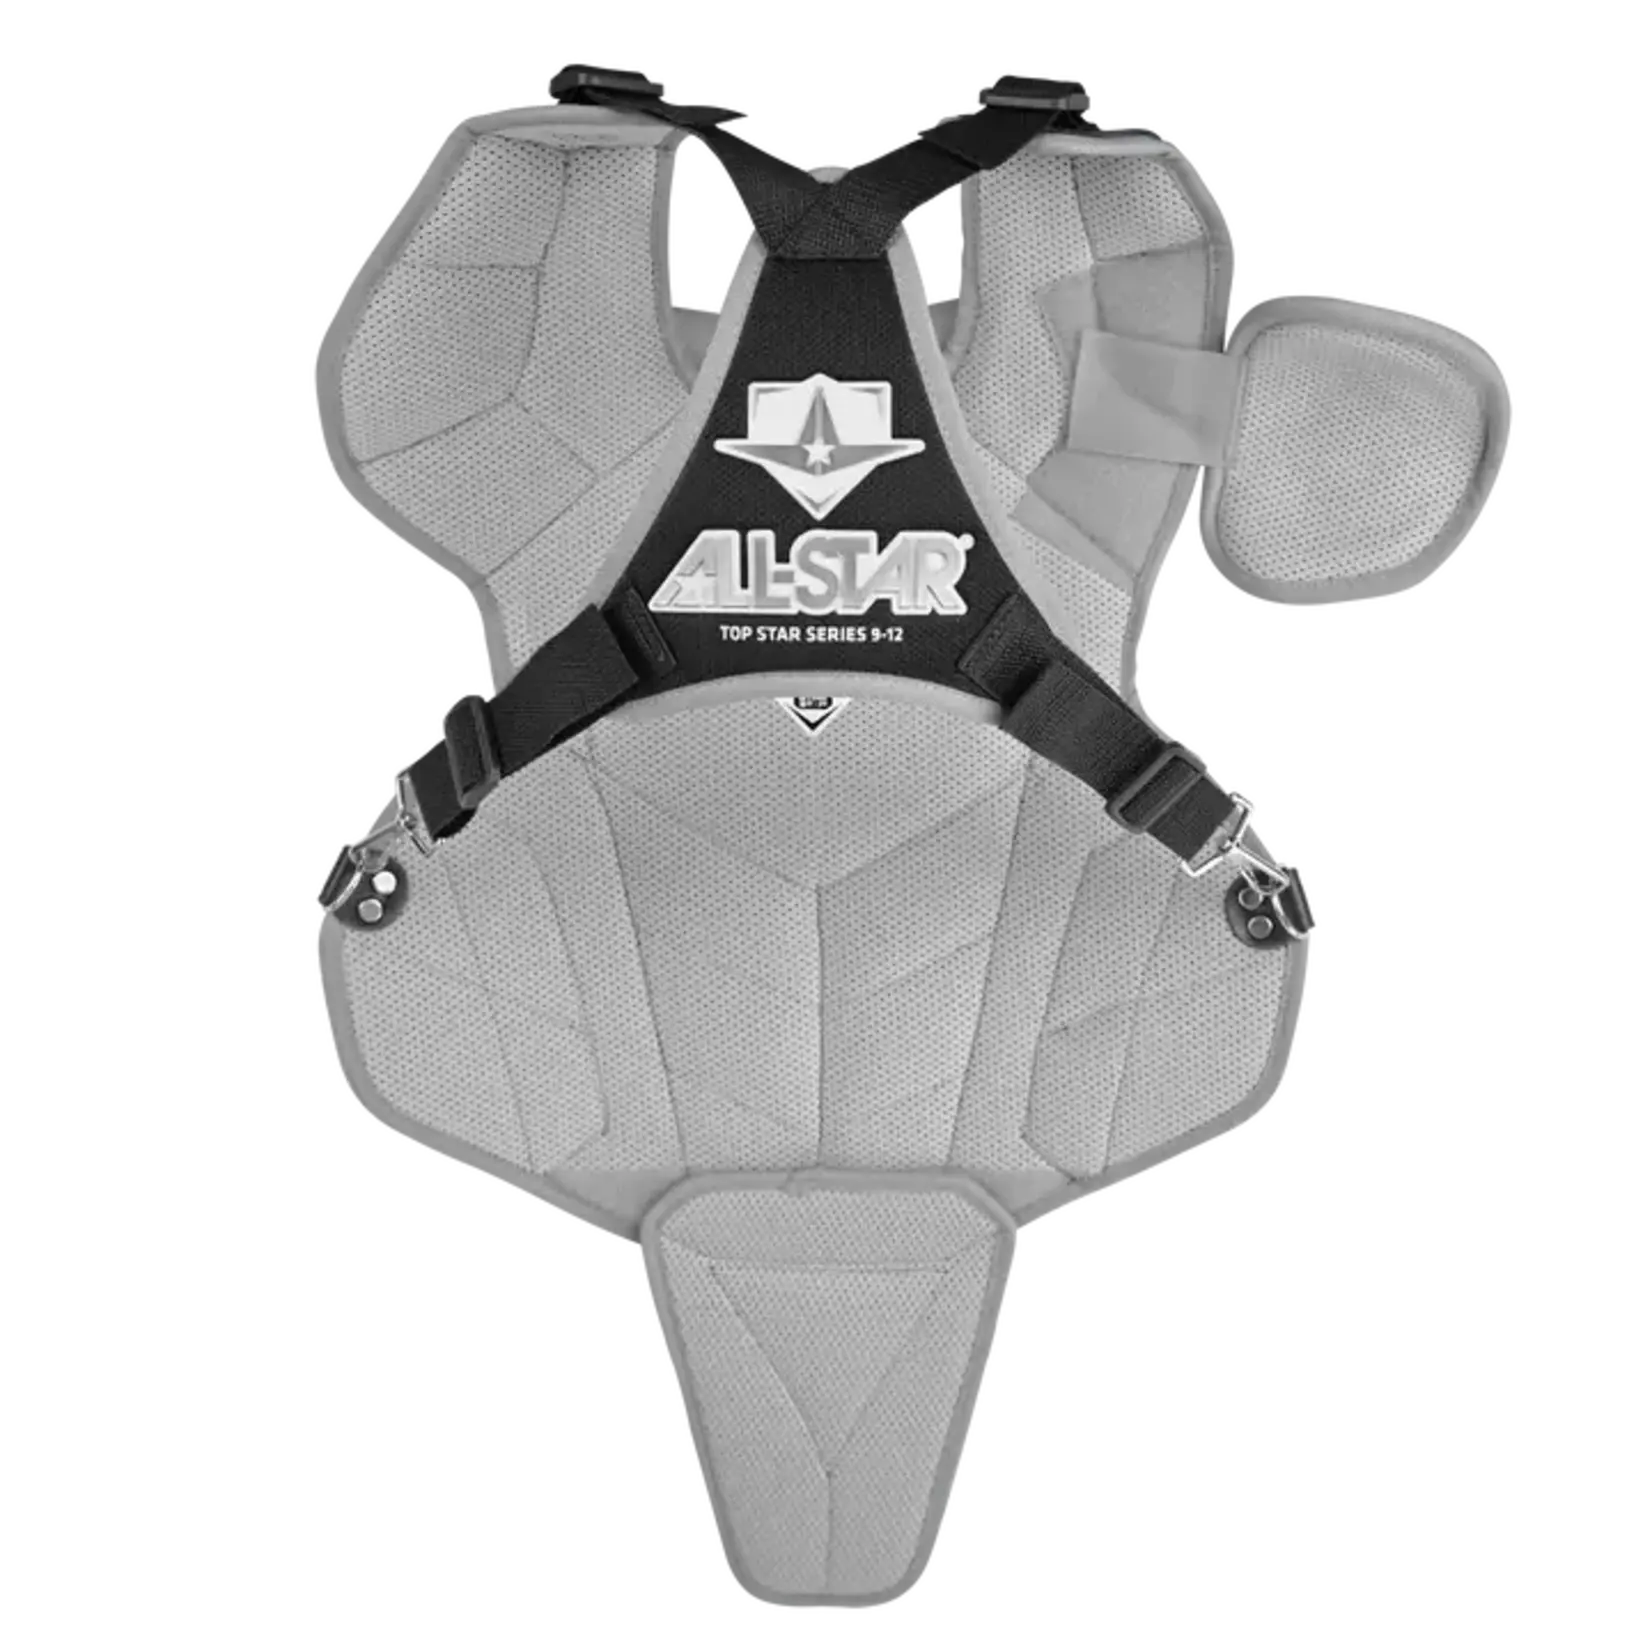 All-Star All Star Top Star 7-9 Chest Protector